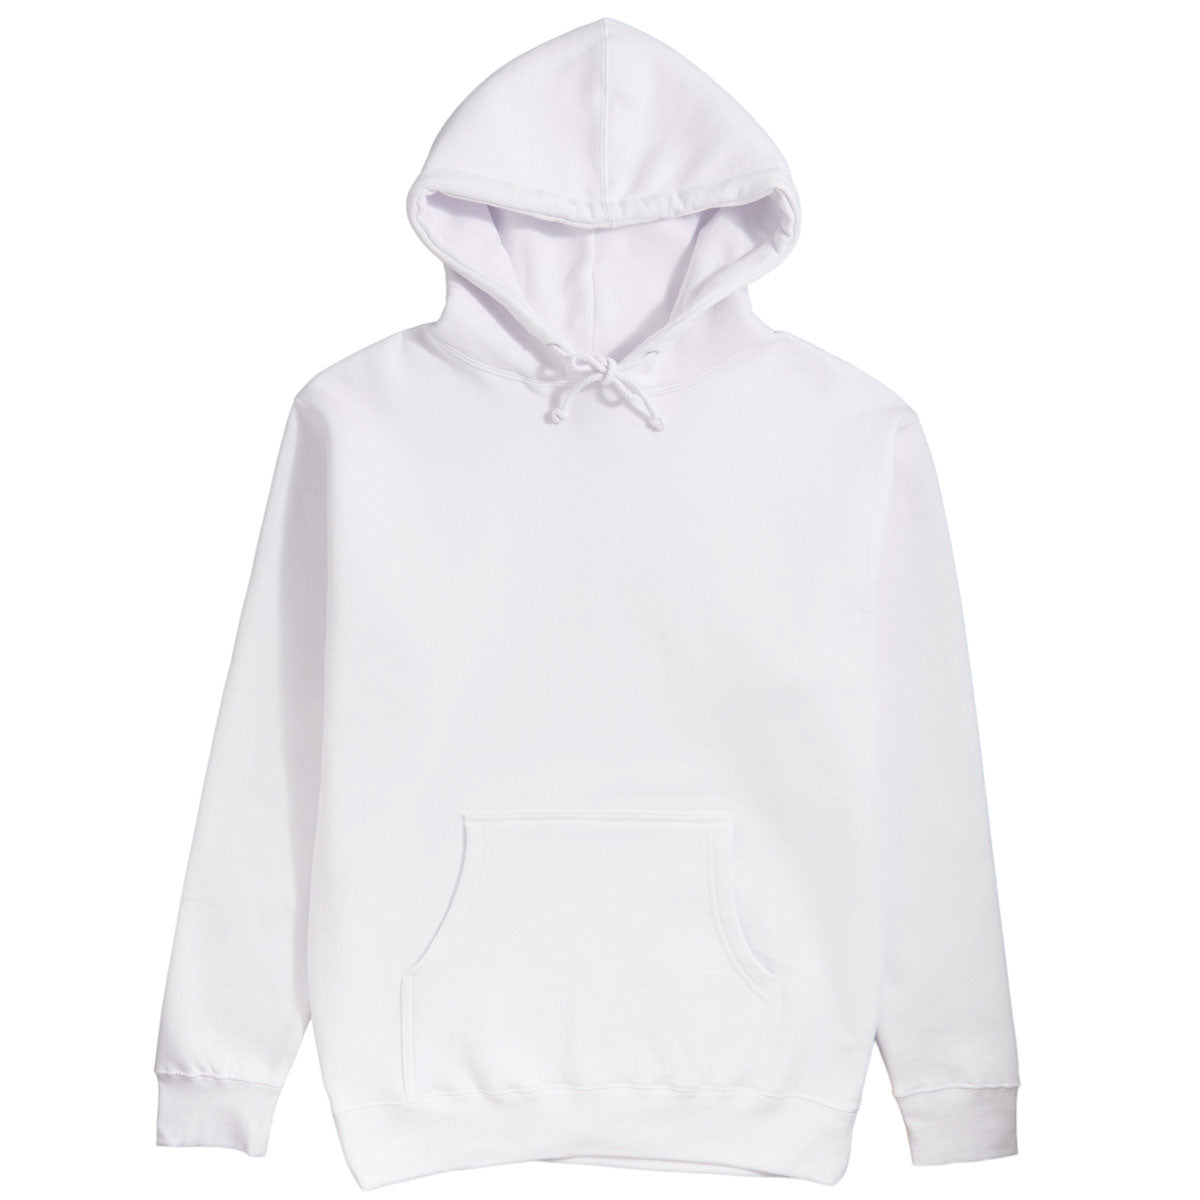 Converse Body Horror Pullover Hoodie - White - MD image 1